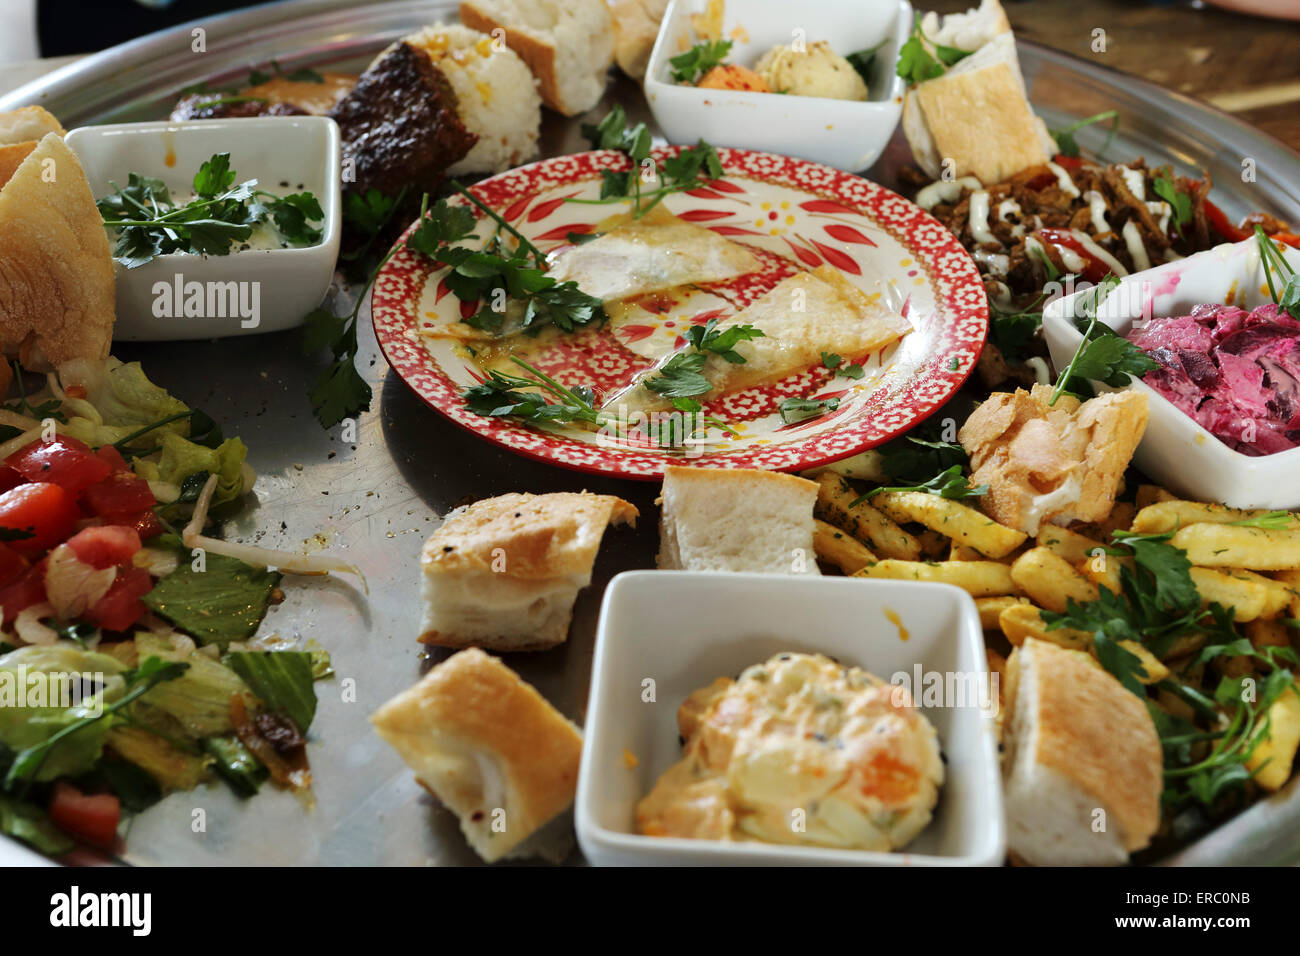 Turkish cuisine served at the Markthal in Rotterdam, the Netherlands. Stock Photo